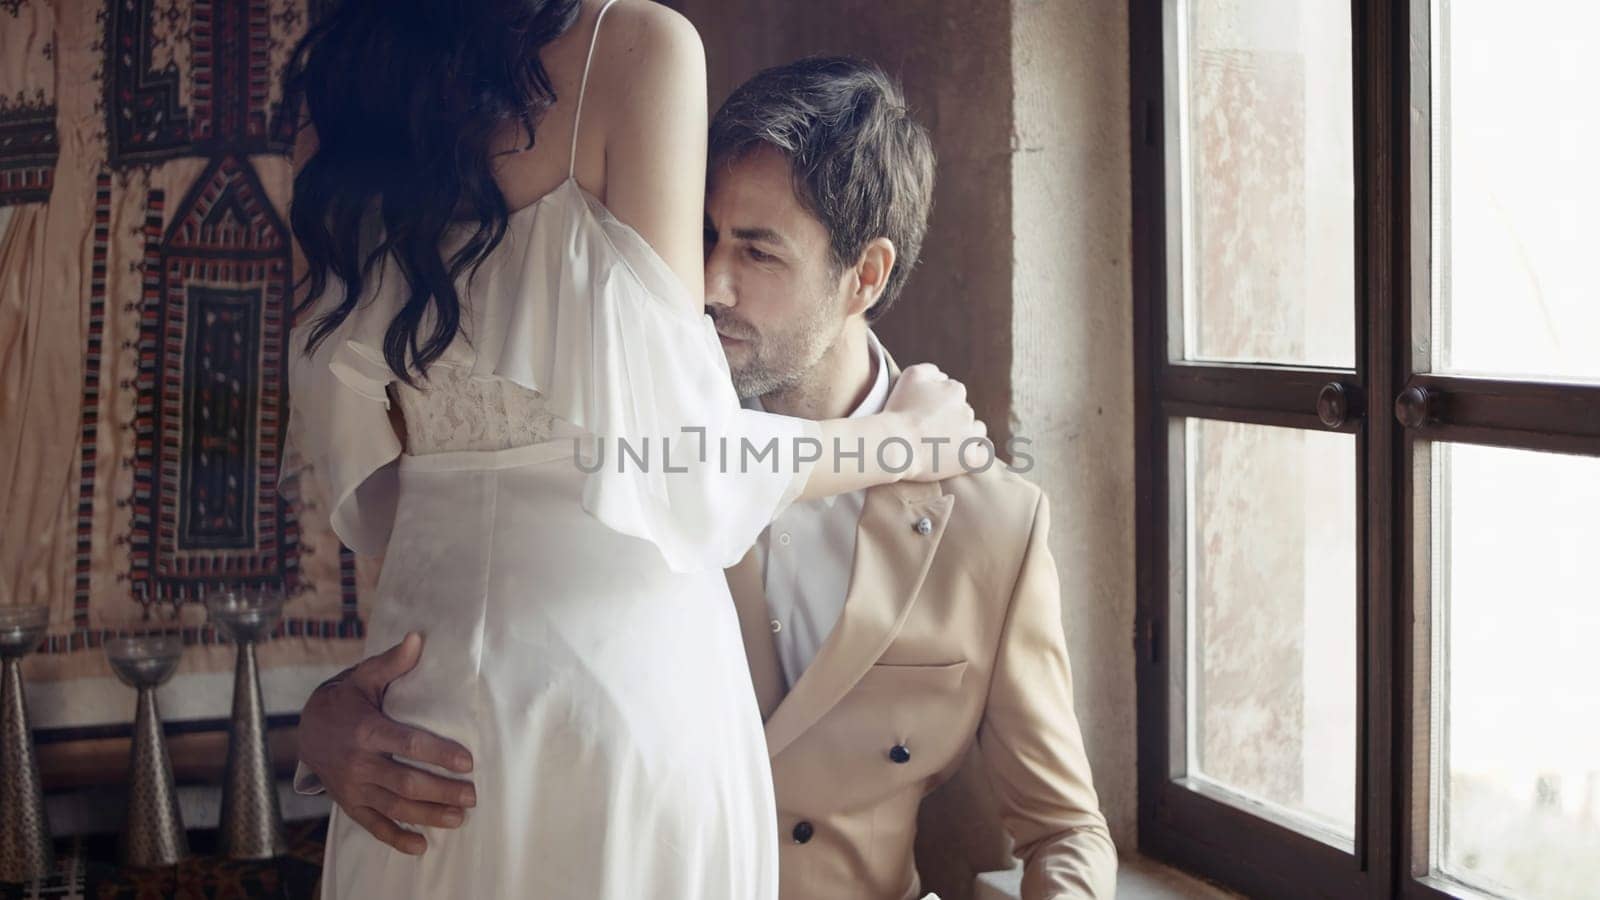 Just married couple embracing during photosession. Action. Happy bride and groom in wedding dress in beige room interior